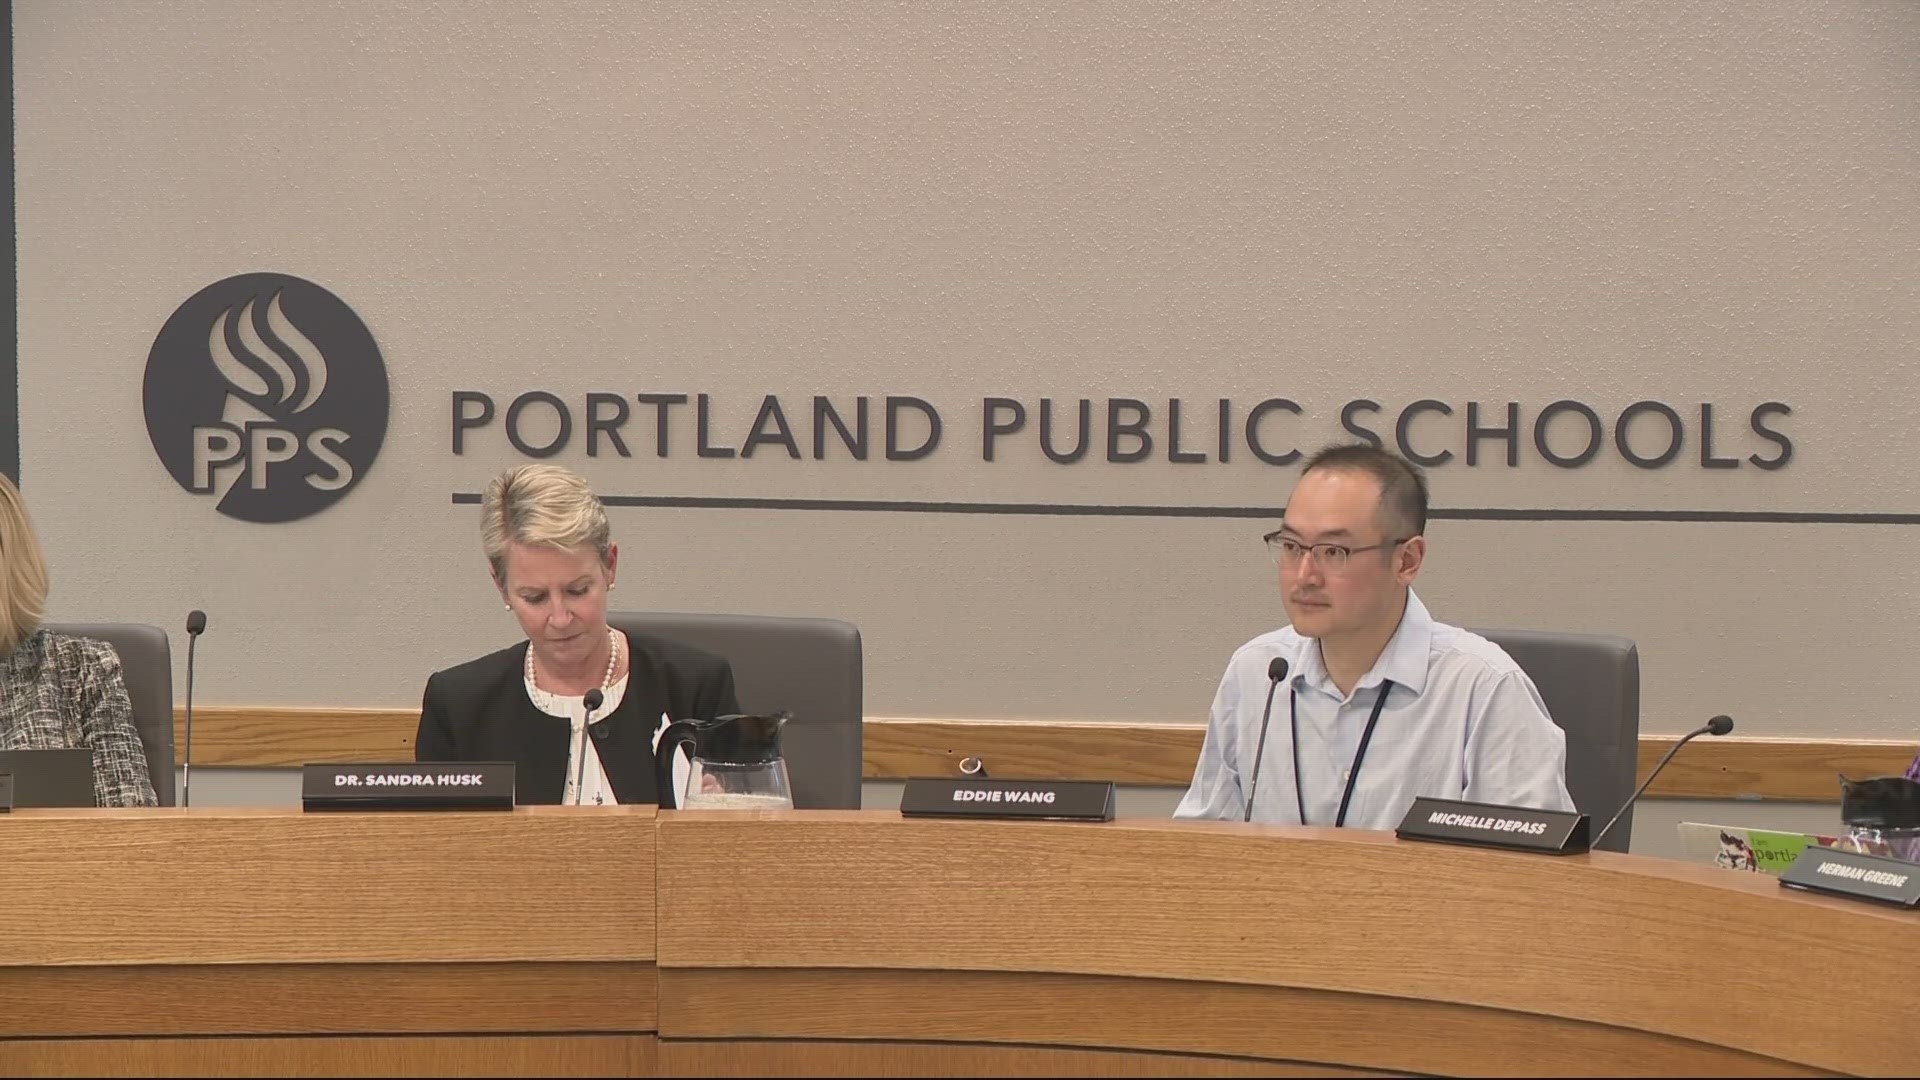 The possible addition of military prep courses at some Portland schools is being hotly debated as PPS sheds staff to meet $30 million budget cuts.